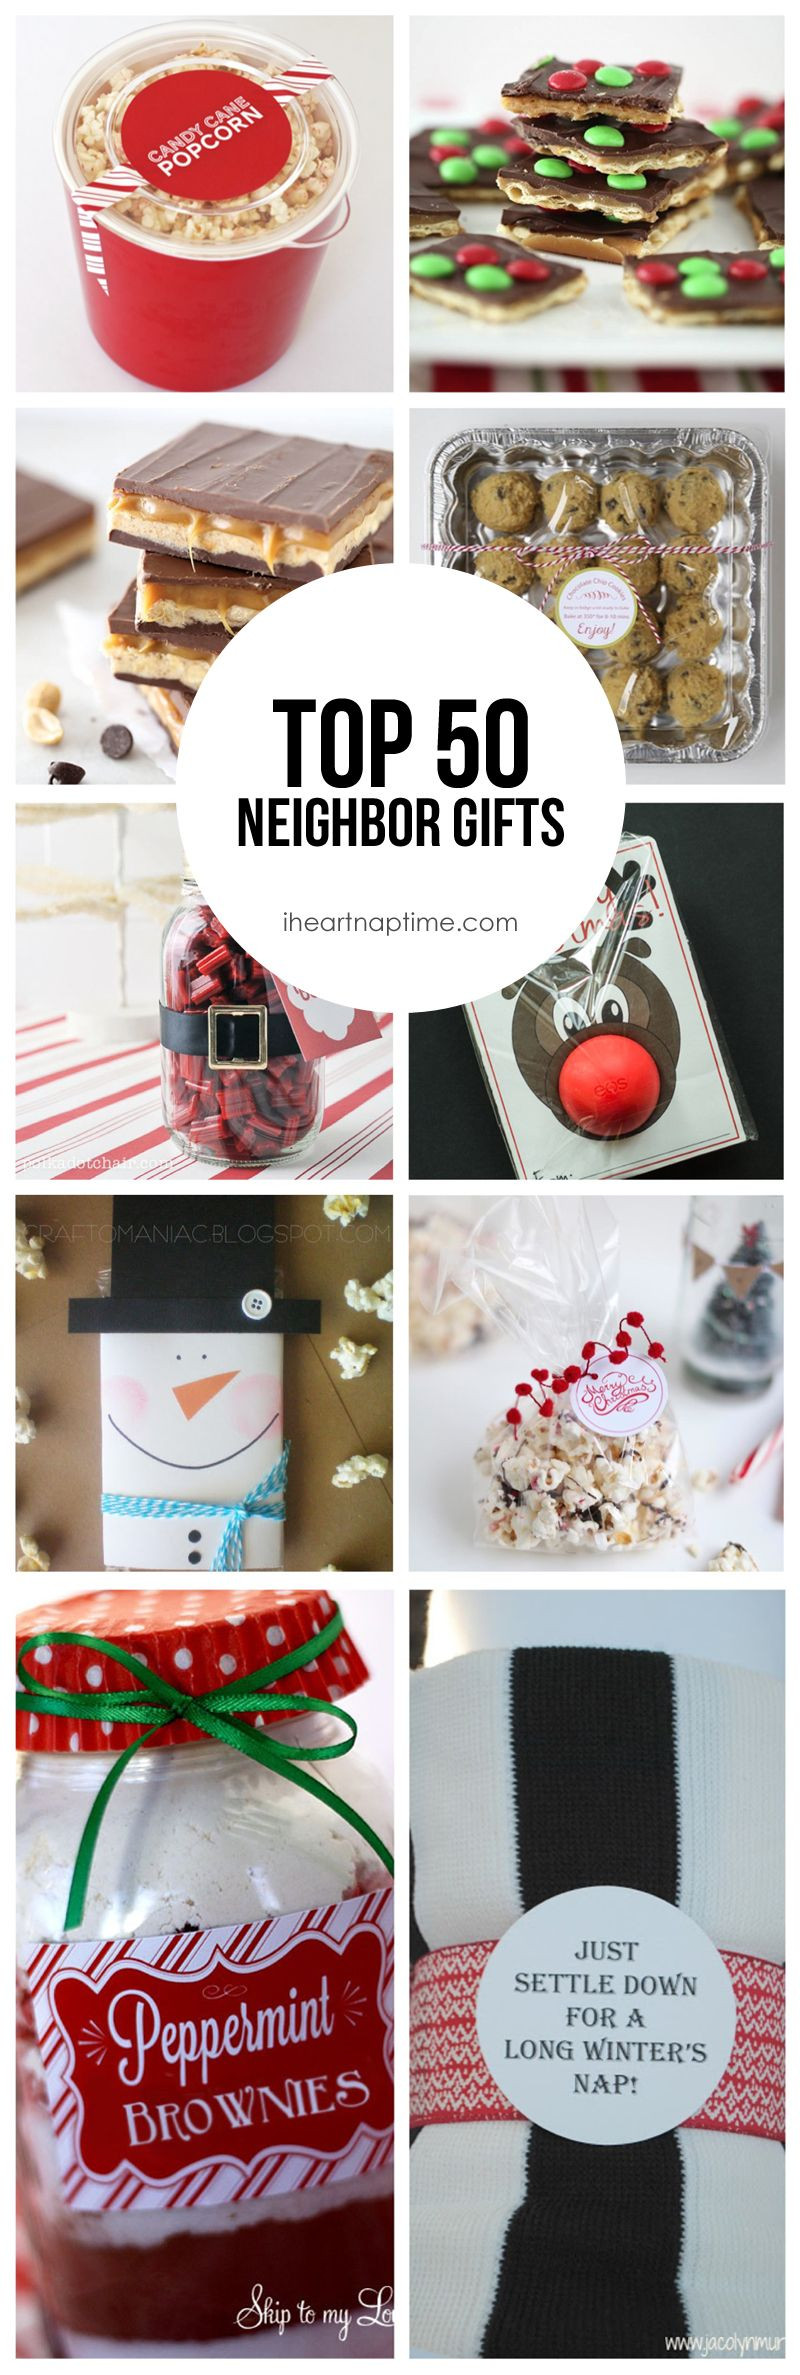 Holiday Gift Ideas For Neighbors
 Top 50 Neighbor Gift Ideas Gifts DIY